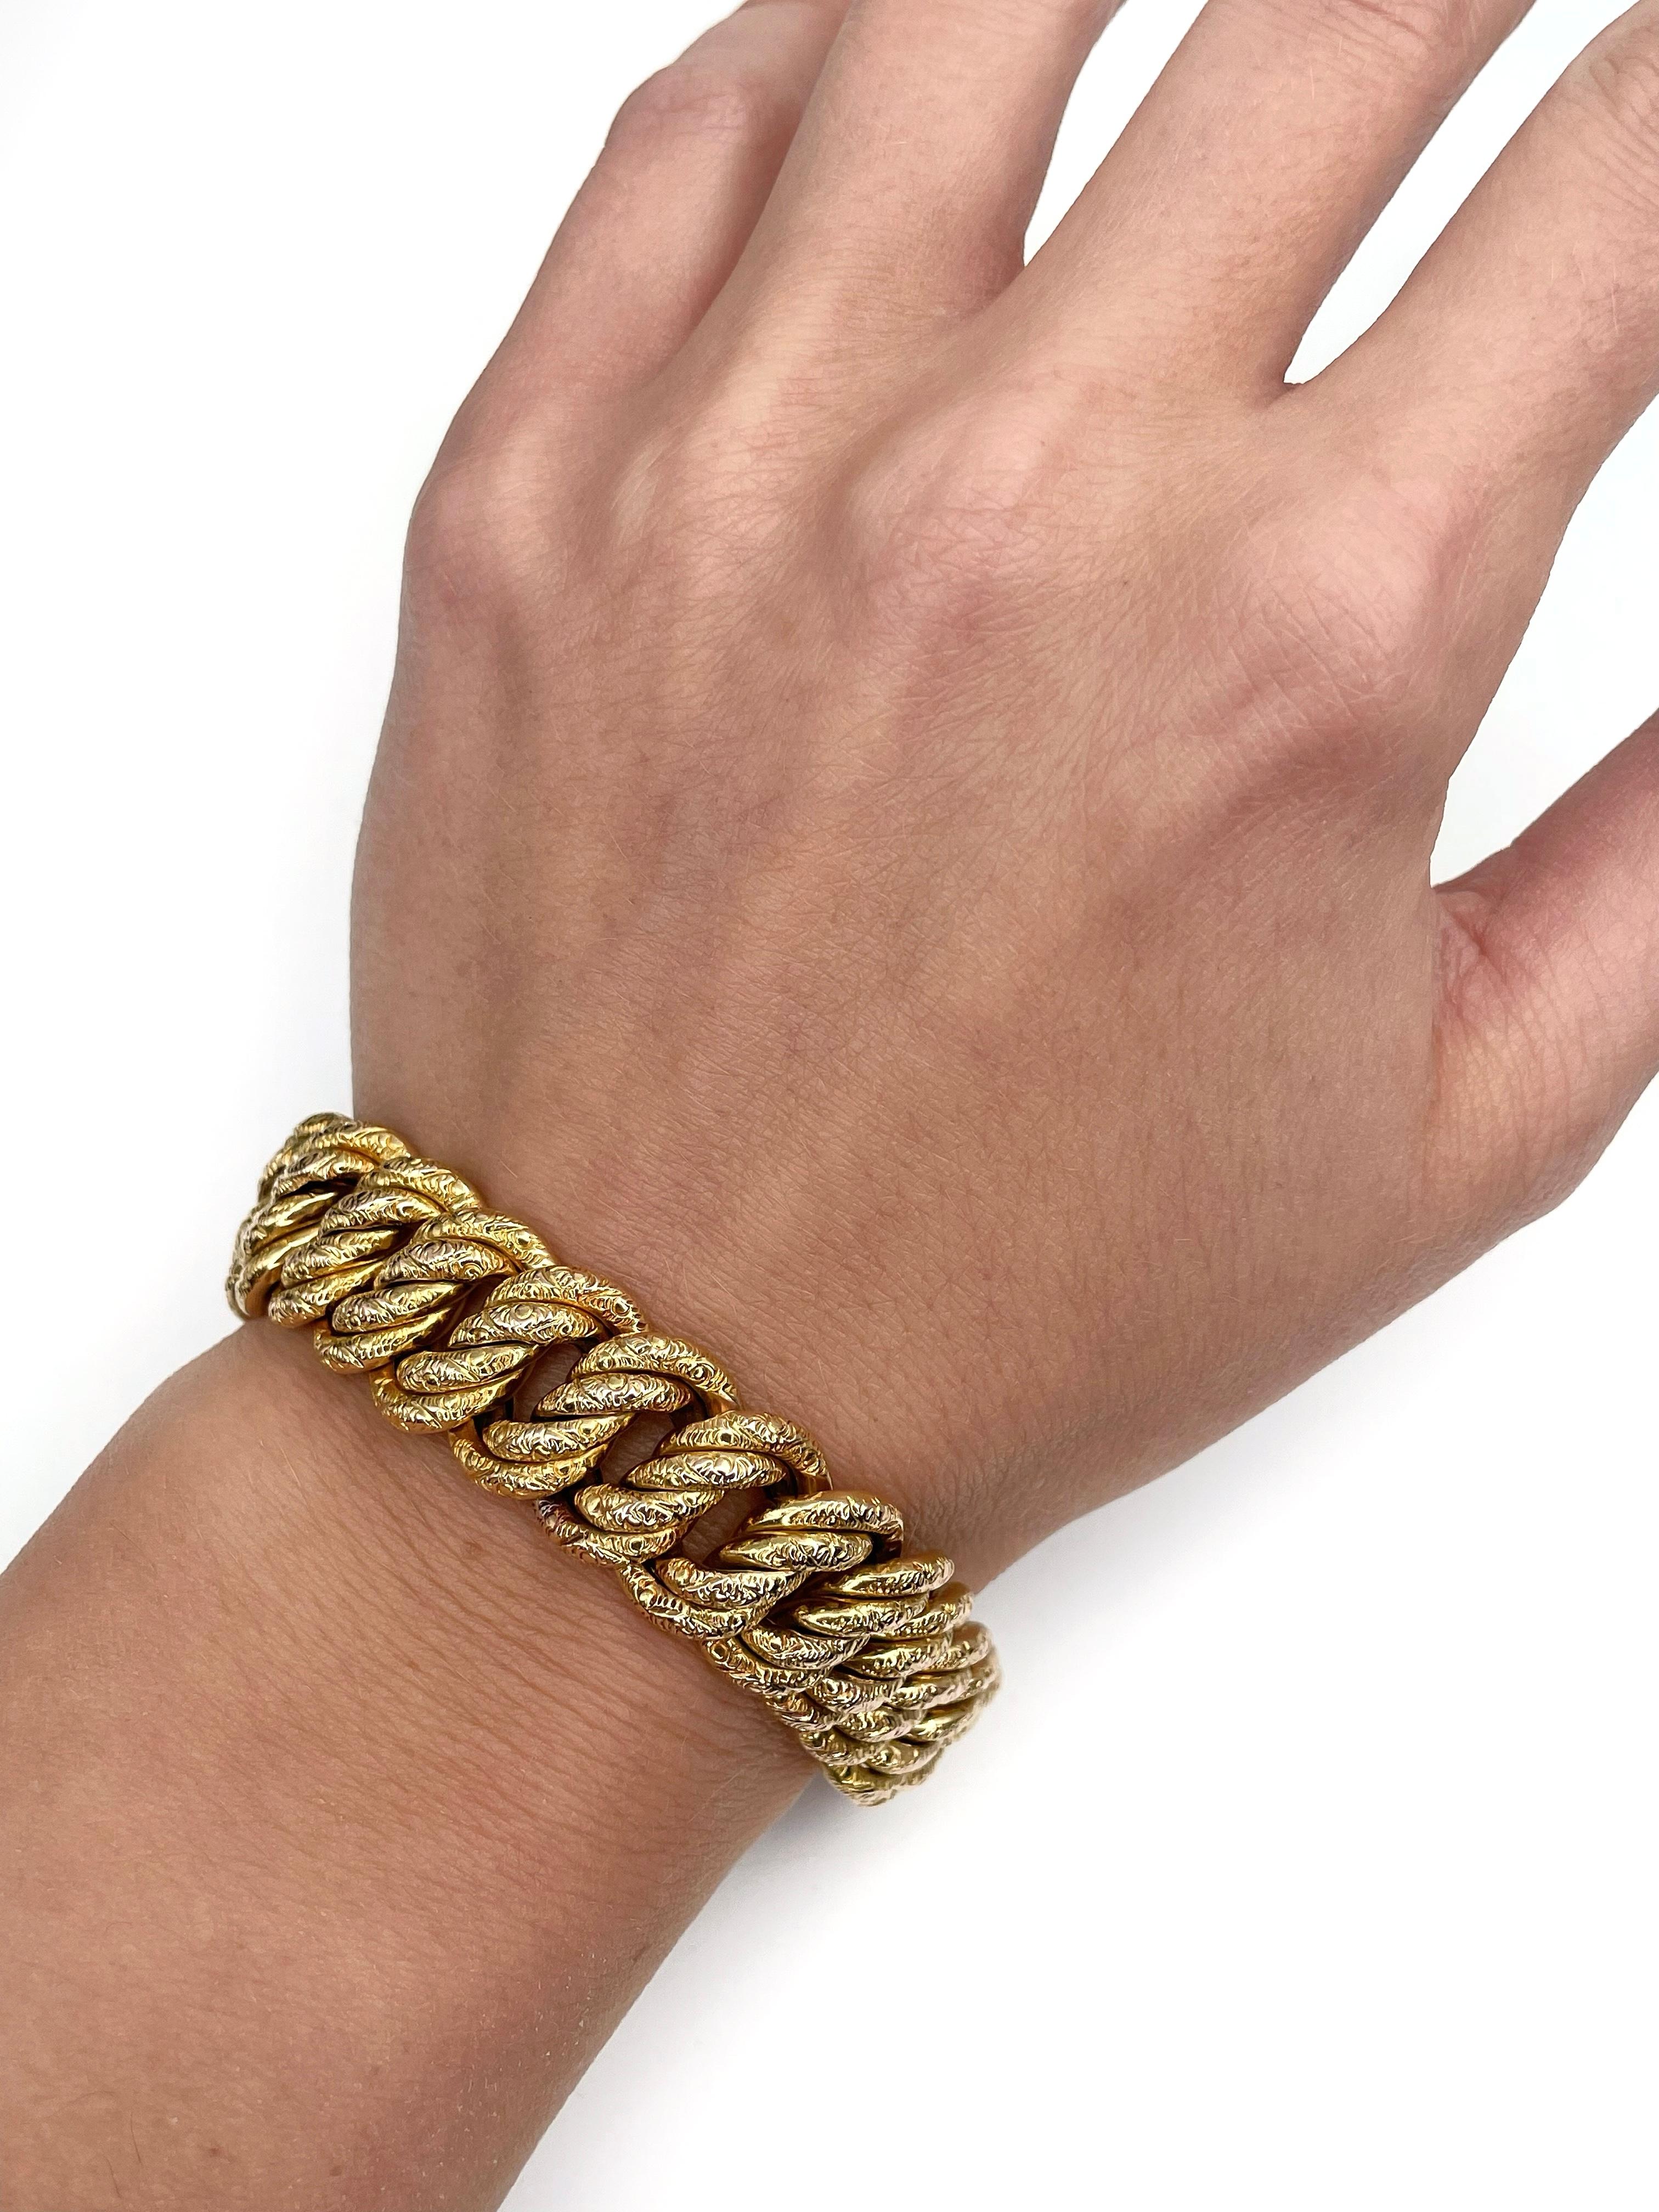 It is a beautiful antique chain link bracelet crafted in 56 hallmark slightly yellow gold. Circa 1880. It has a good closure with a safety chain.

Hallmarks can be seen in photos. 

Weight: 33.02g
Length: 19.5cm
Width: 1.5cm

———

If you have any